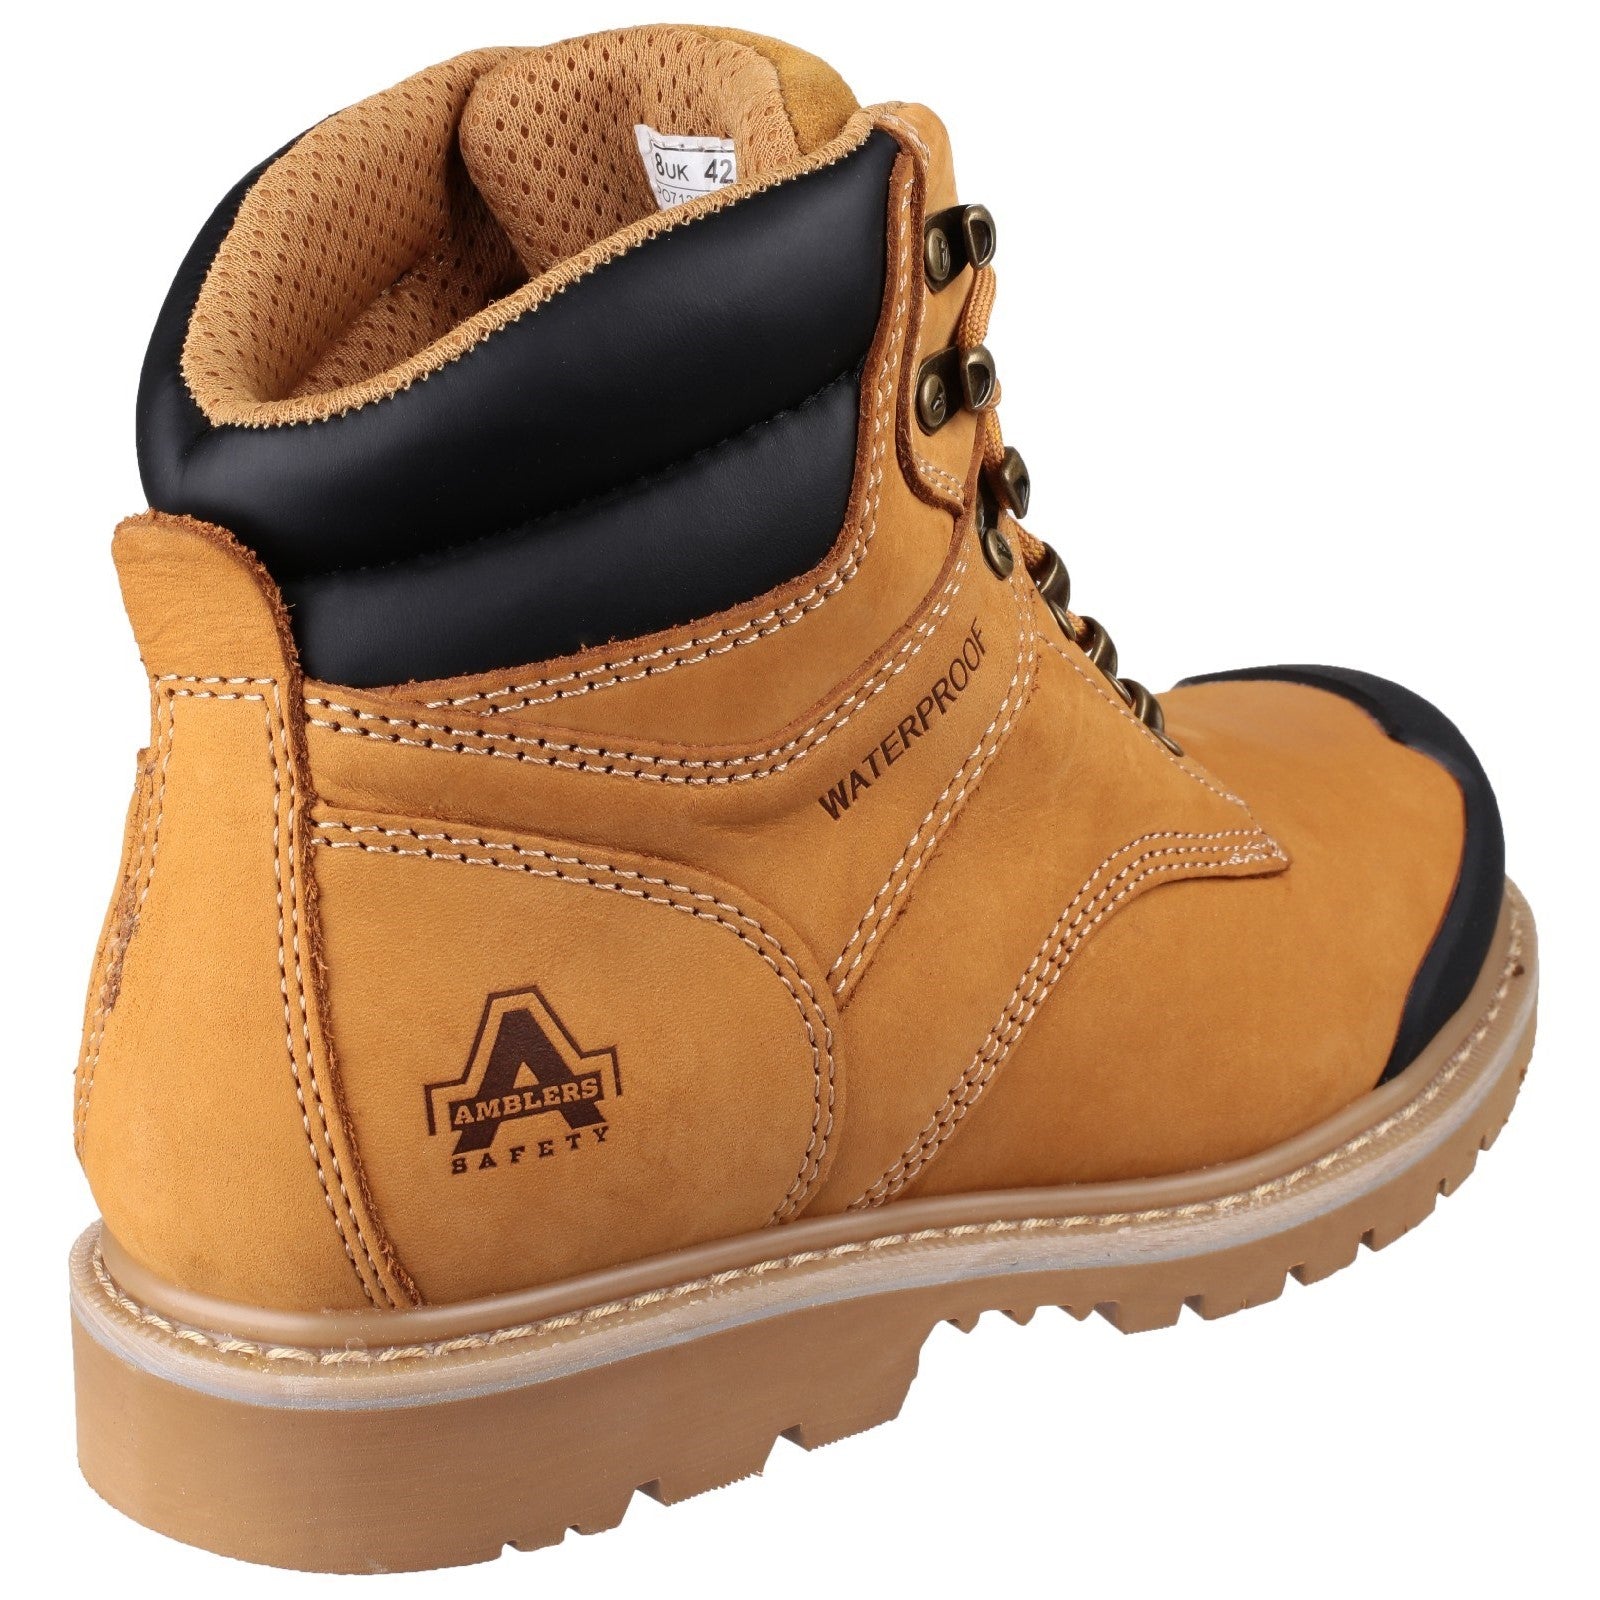 Amblers FS226 Industrial Safety Boot